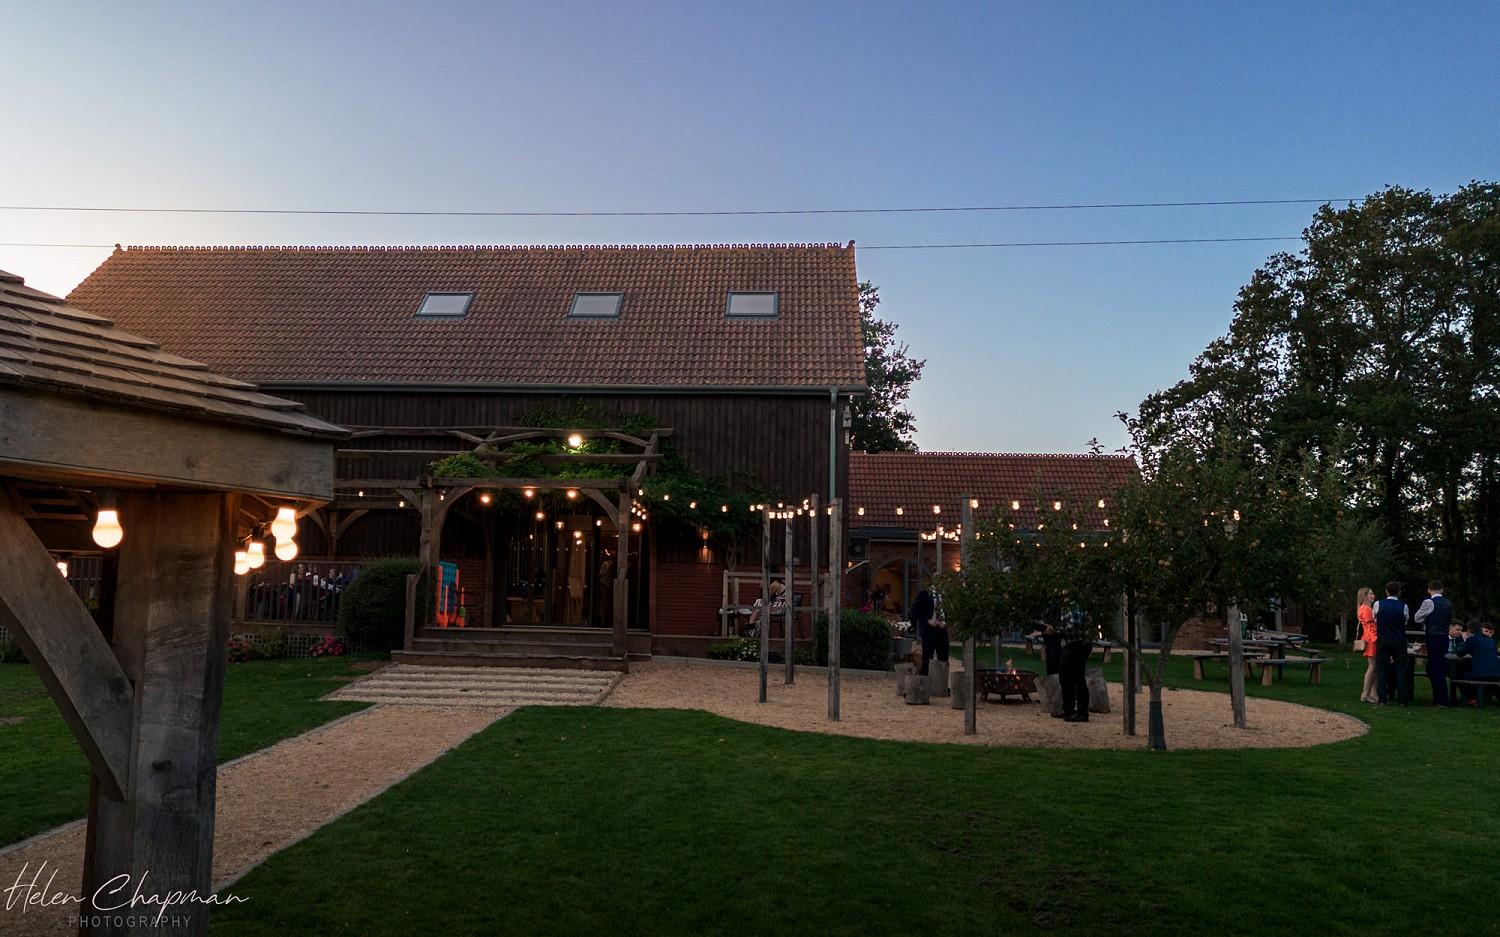 An evening scene at a barn-style venue with warm lighting and guests mingling outside. the barn has a gently lit interior and exterior decorations include string lights and greenery.